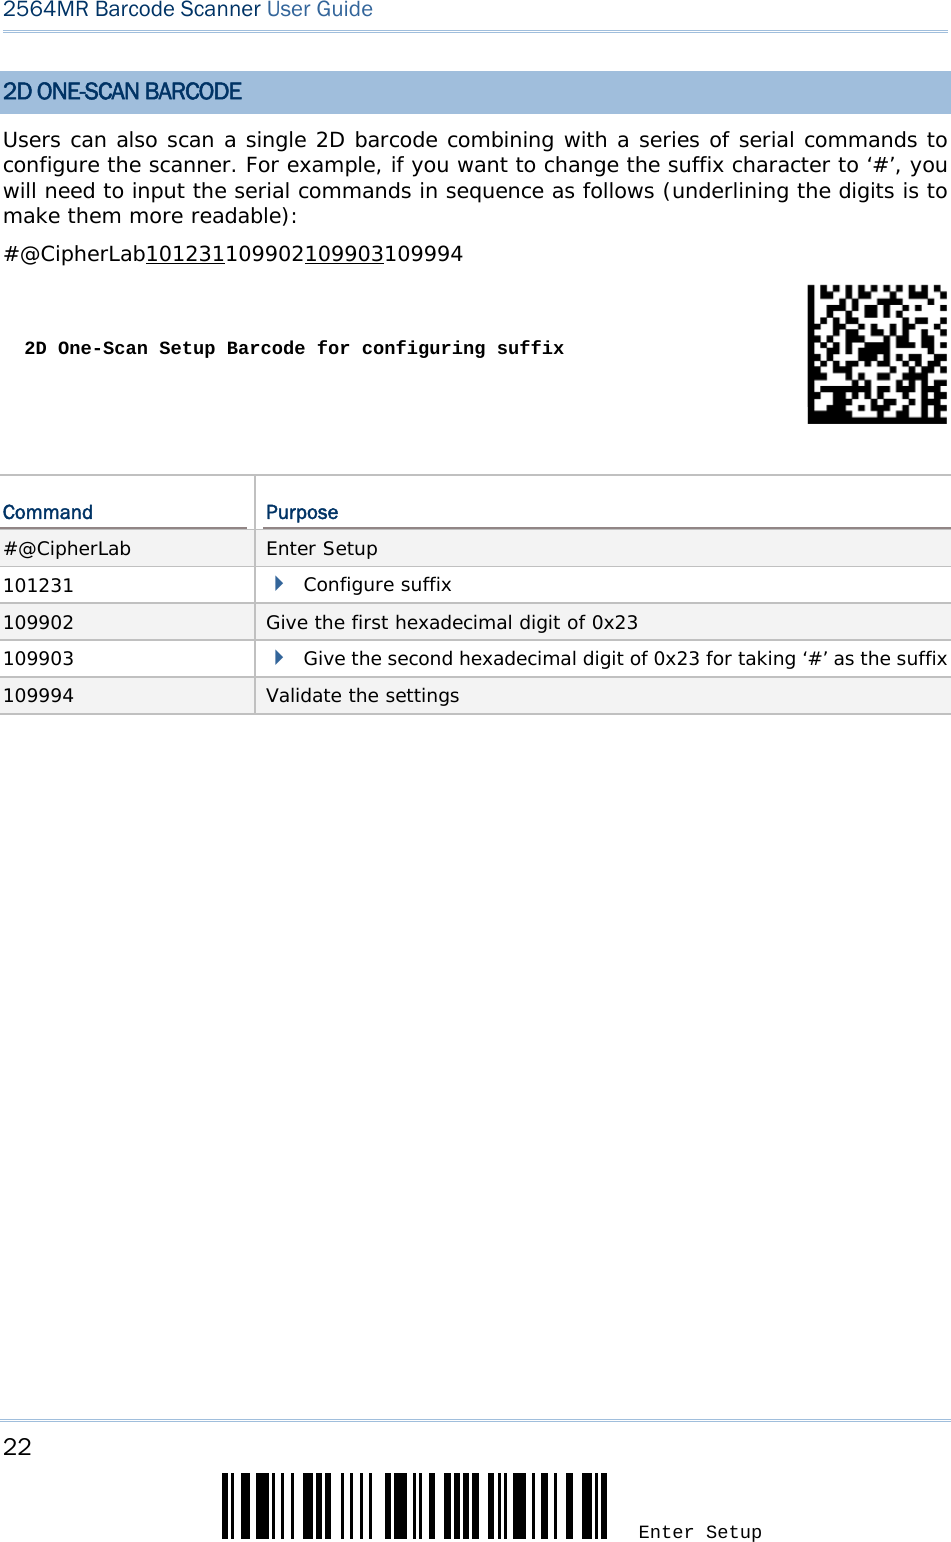 22 Enter Setup 2564MR Barcode Scanner User Guide  2D ONE-SCAN BARCODE Users can also scan a single 2D barcode combining with a series of serial commands to configure the scanner. For example, if you want to change the suffix character to ‘#’, you will need to input the serial commands in sequence as follows (underlining the digits is to make them more readable): #@CipherLab101231109902109903109994 2D One-Scan Setup Barcode for configuring suffix Command  Purpose #@CipherLab  Enter Setup 101231   Configure suffix 109902  Give the first hexadecimal digit of 0x23 109903   Give the second hexadecimal digit of 0x23 for taking ‘#’ as the suffix 109994  Validate the settings  